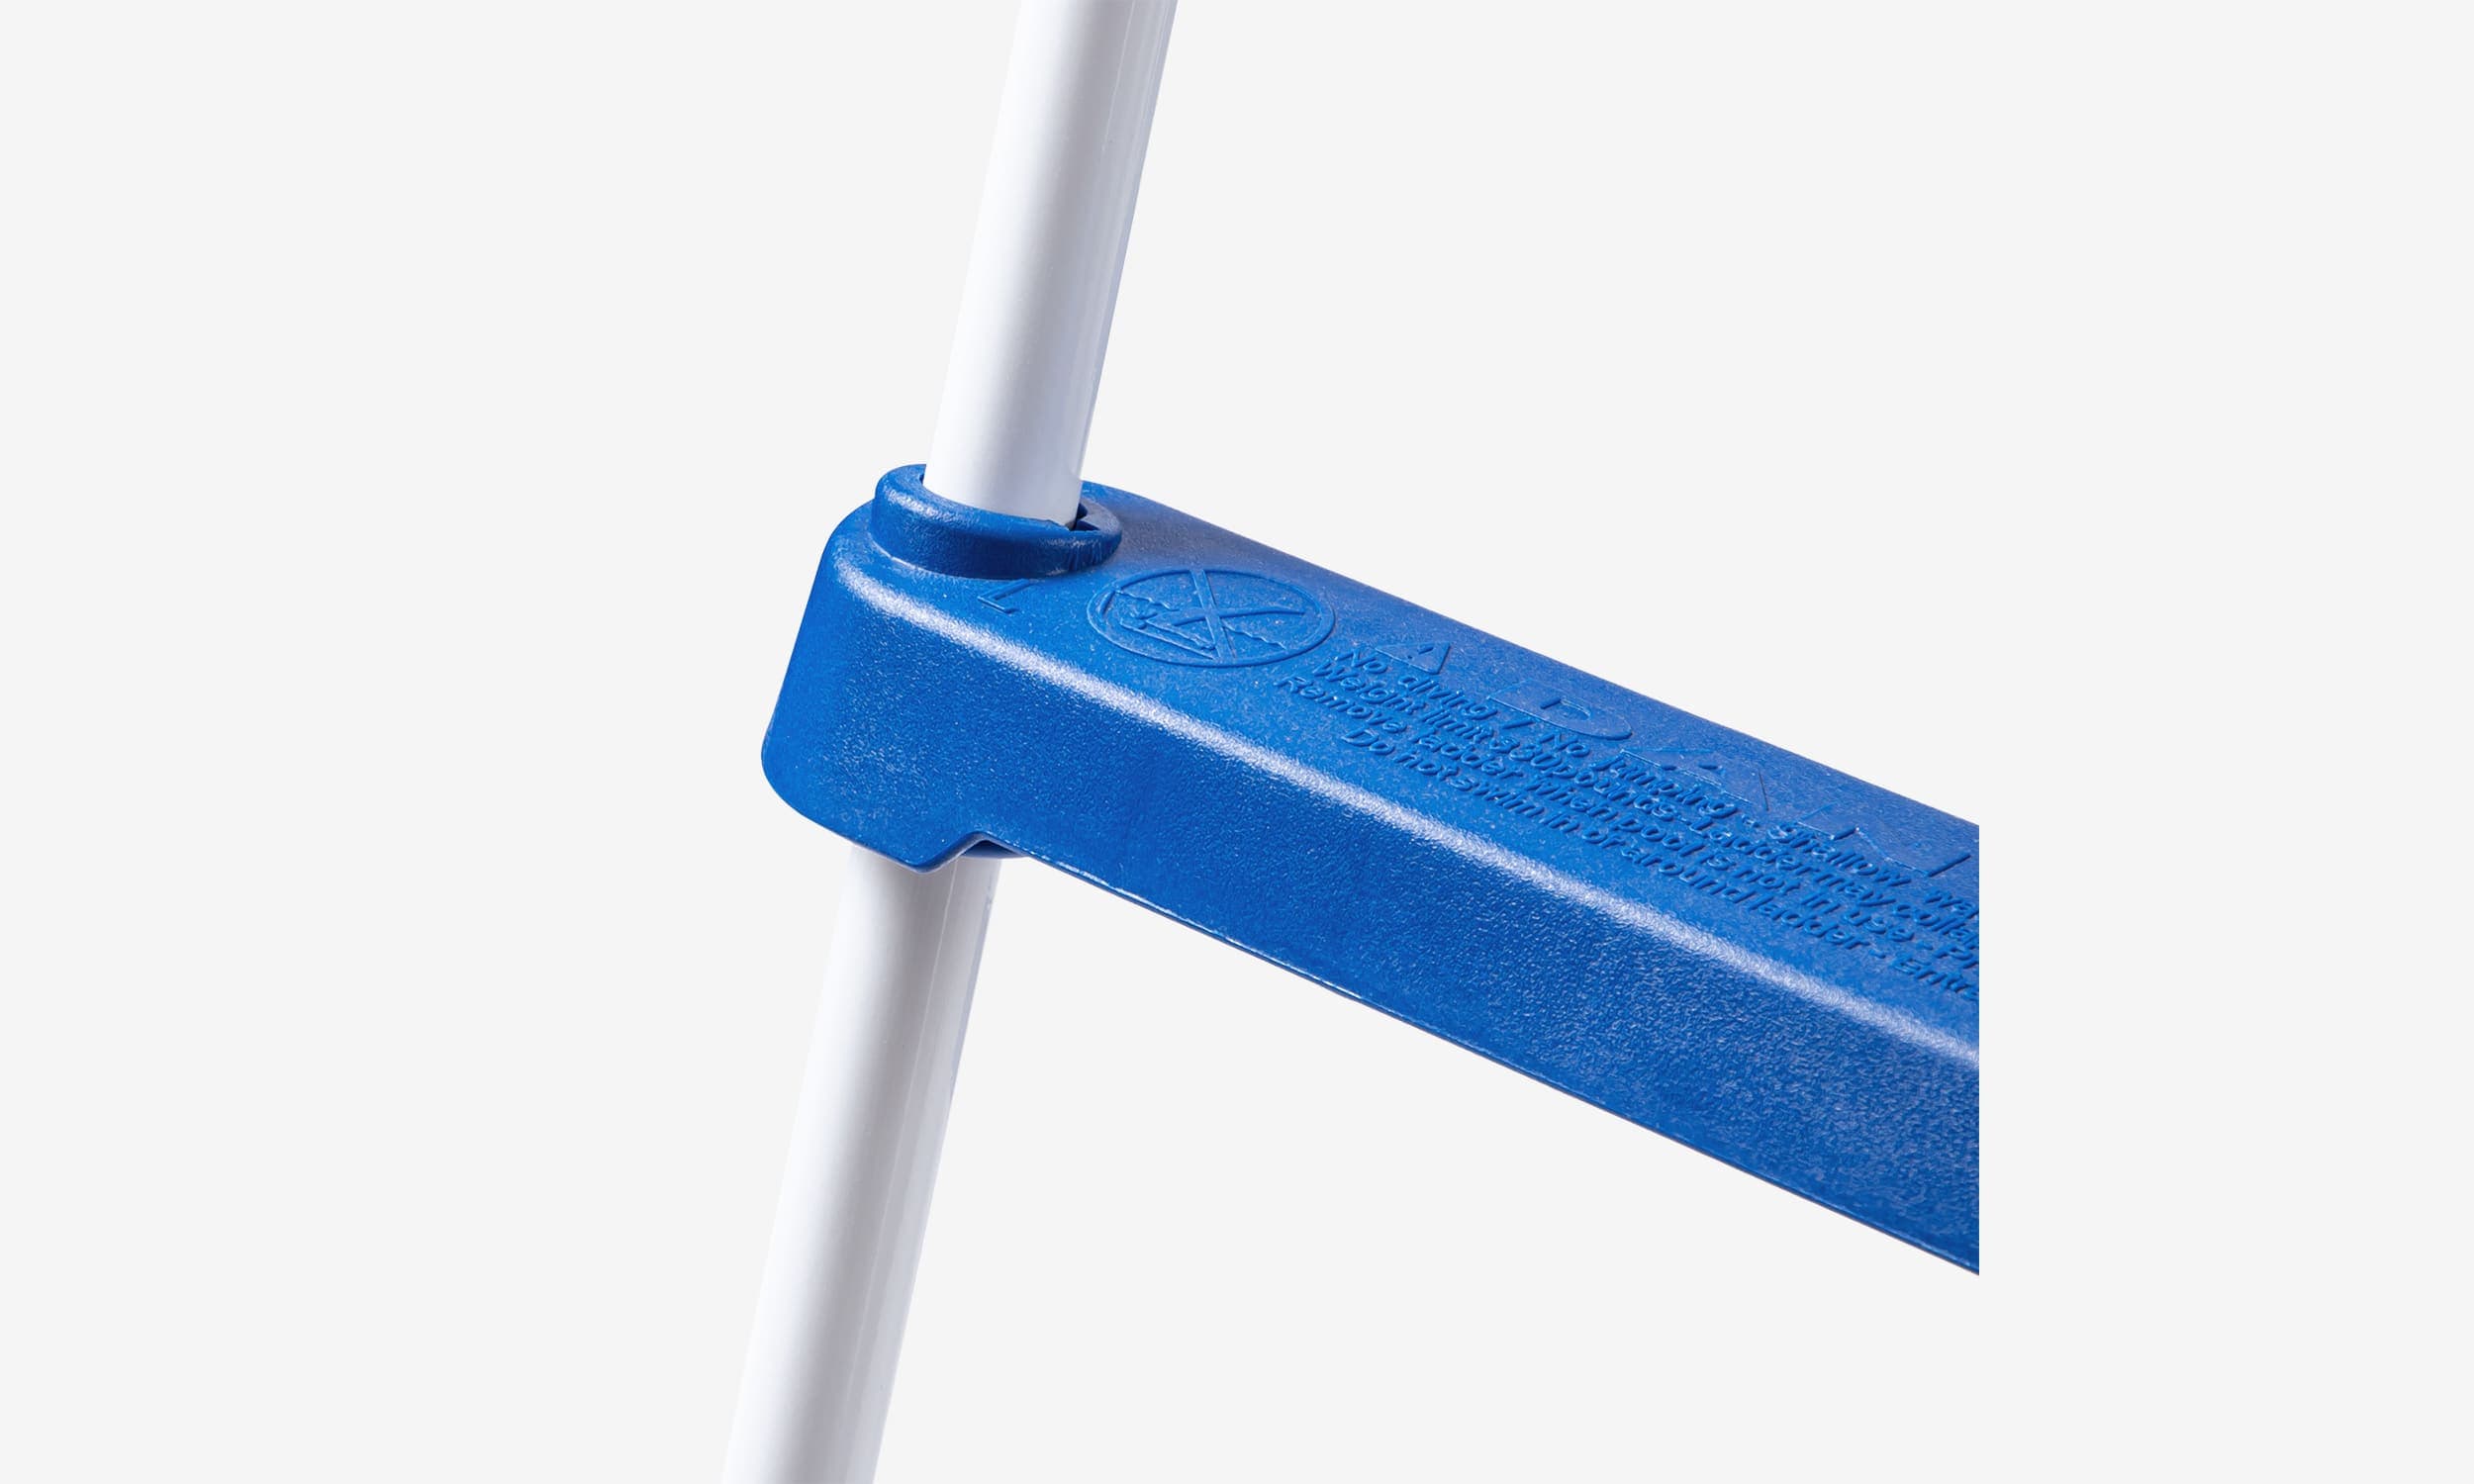  Funsicle 52" SureStep Ladder close up view